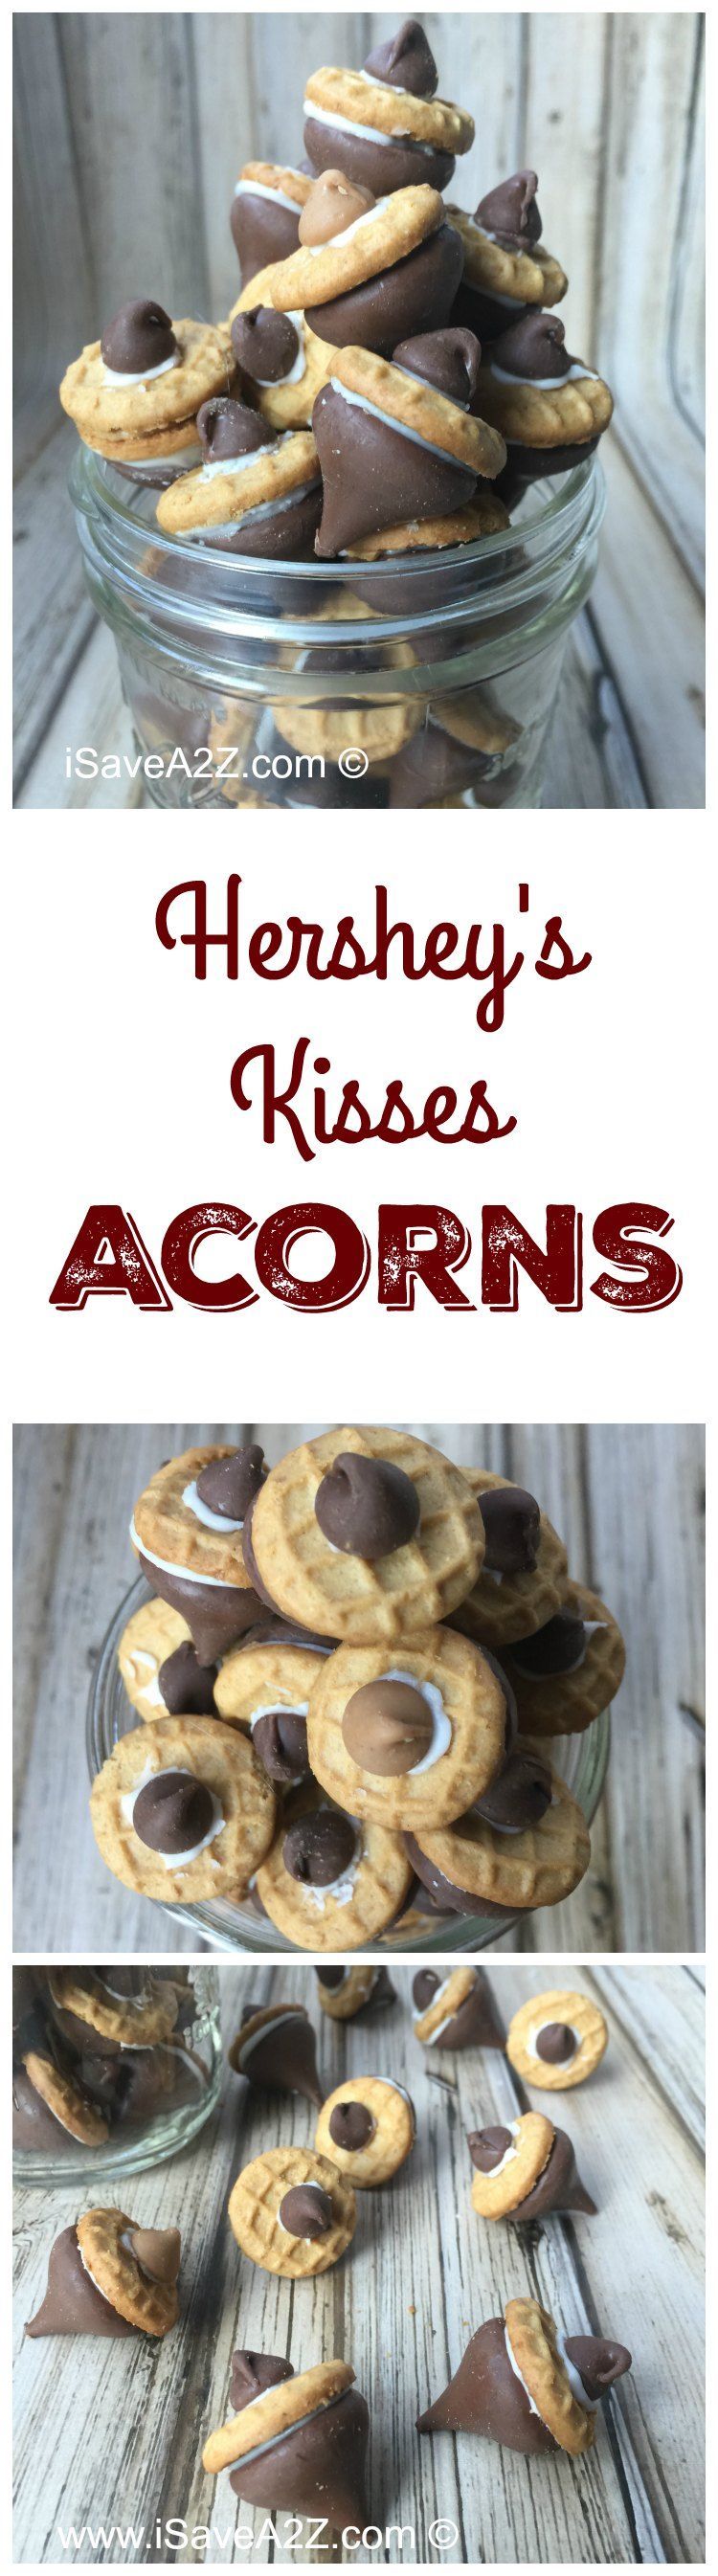 Cute Acorns made out of Hersheys Kisses, Butter Butter Bites and Chocolate Chips!  Super Cute and